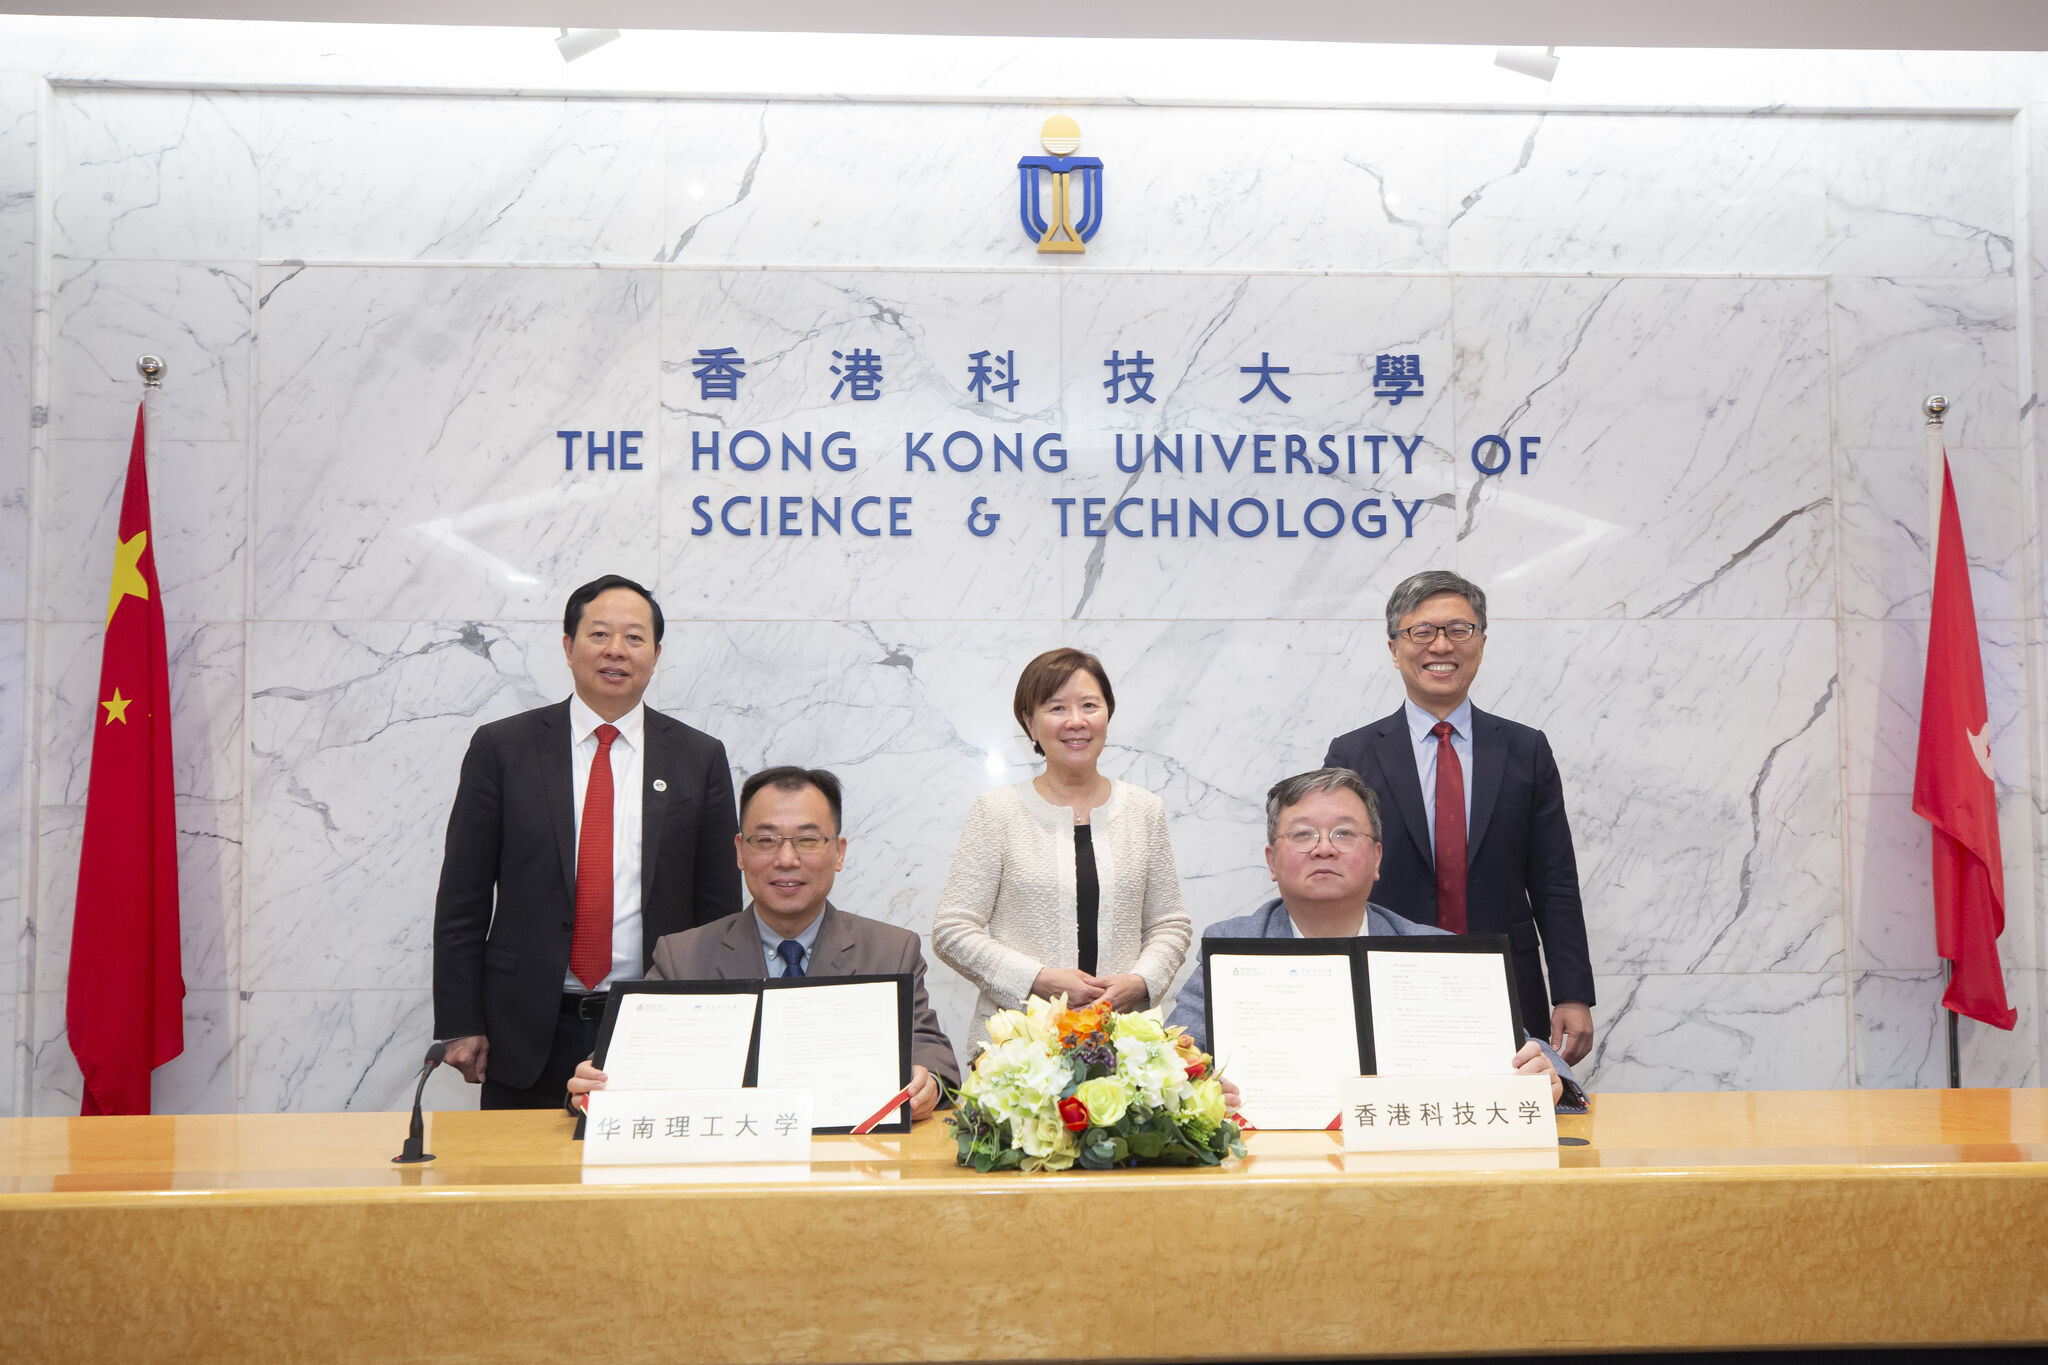 HKUST Provost Prof. GUO Yike (front right) and SCUT Vice President Prof. XU Yong (front left) signed the first undergraduate student exchange agreement under the witness of HKUST Council Chairman Harry SHUM (back row first right), HKUST President Prof. Nancy IP (back row first right) and SCUT Party Secretary Prof. ZHANG Xichun (back row first left).